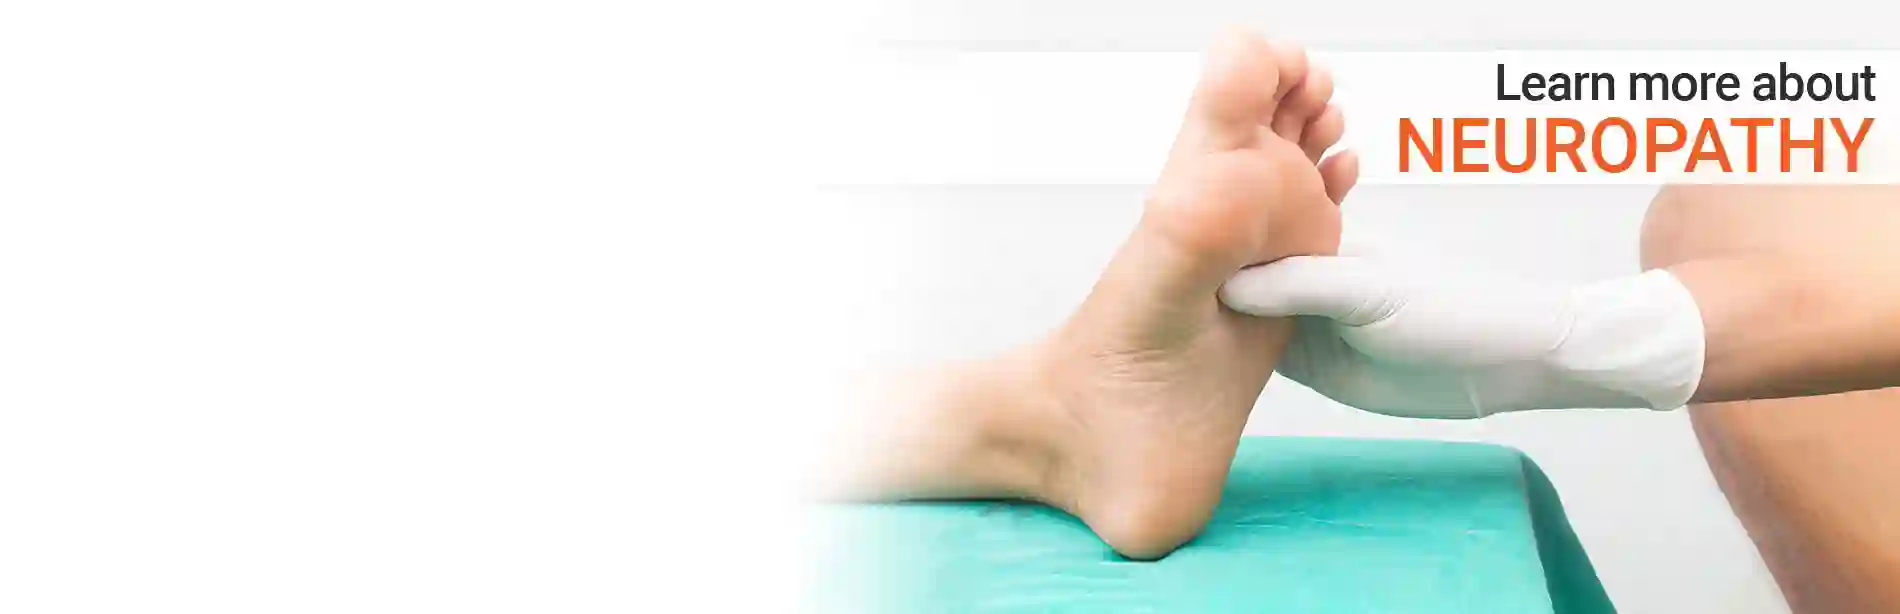 Foot and Ankle Pain Treatment in the Sioux Falls, SD 57105 area